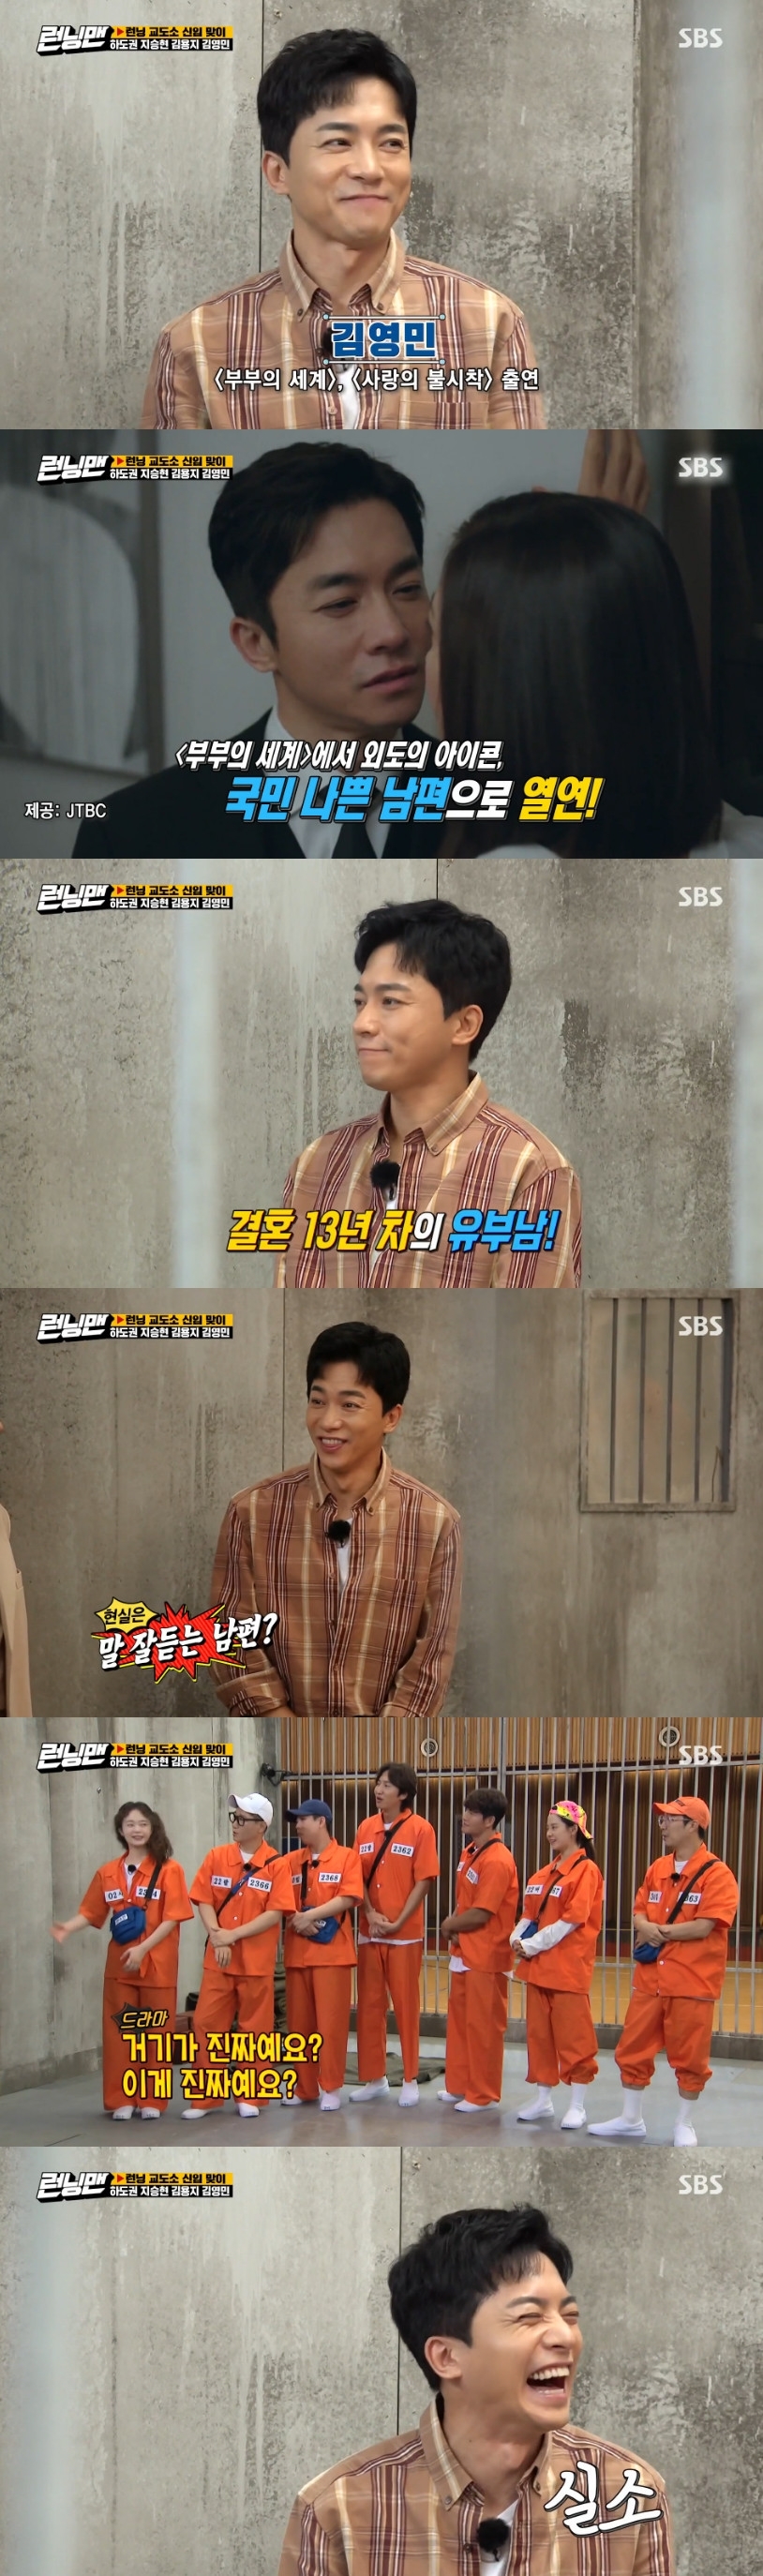 Actor Kim Yung-min showed off his charm of reversal in a completely different aspect from the character in the drama.Kim Yung-min appeared as a guest on SBS Running Man broadcast on August 9th with actors Ha Do Kwon, Ji Seung Hyun and Kim Yong Ji.Kim Yung-min is an actor who has revealed the charm of the pale color by digesting various characters in various genres of works.Especially, JTBC gilt drama World of Couple which ended in May, played the role of playboy Son Jae Hyuk and made a strong impression on viewers.Kim Yung-min, who was divided into Son Je-hyuk in the play, was well received for acting, realistically digesting the role of having an affair with Ji Sun-woo (Kim Hee-ae), who had been in love with his wife Go Ye-rim (Park Sun-young).But in reality, it was a good Husband that was completely different from Son Je-hyeok.MC Yoo Jae-Suk commented on Kim Yung-mins performance in the World of Couples and said, In fact, I married after five years of devotion and married 13 years.Kim Yung-min also said he was submissive to his real wife.When Yoo Jae-Suk asked, What kind of Husband is it actually? Kim Yung-min laughed, It is Husband who listens well.In the Running Man race, which started after that, I was surprised by the fact that I was doing the words and actions carefully calculated according to the operation while showing off the charm.Kim Yung-min showed a bad appearance in rugby Game and was reprimanded by Lee Kwang-soo, Young-min can not make his brother Game dirty.However, when prison race began in earnest, he played a role as a member of the crew to escape Bose Corporation (Ji Seok-jin).The production team told Kim Yung-min, Bose Corporation and Bose Corporation mates are deoxygenated before 3 pm, and Bose Corporation and the team win.The identity of Bose Corporation can be seen by the hidden markers on the shoe insole. Kim Yung-min said in an interview with the production team, The stupid concept should fit well.Then, during the game, he pretended to drop something on the floor and impressed with the strategy of confirming the underside of the other casts shoes.